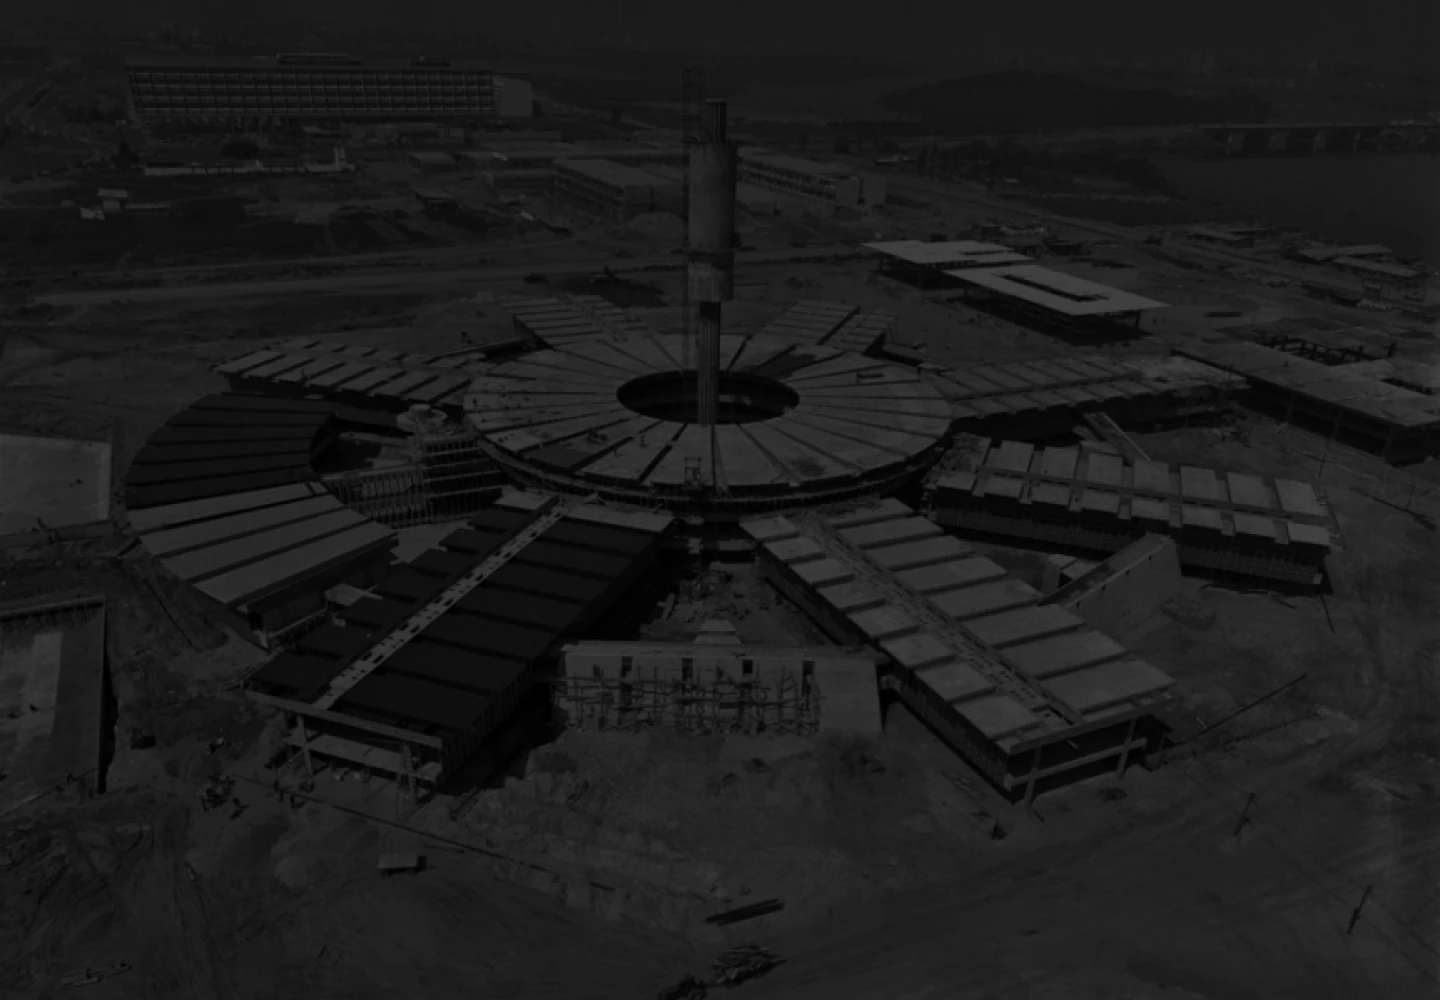 Black and white aerial photo of the construction of Cenpes, Petrobras' research center.